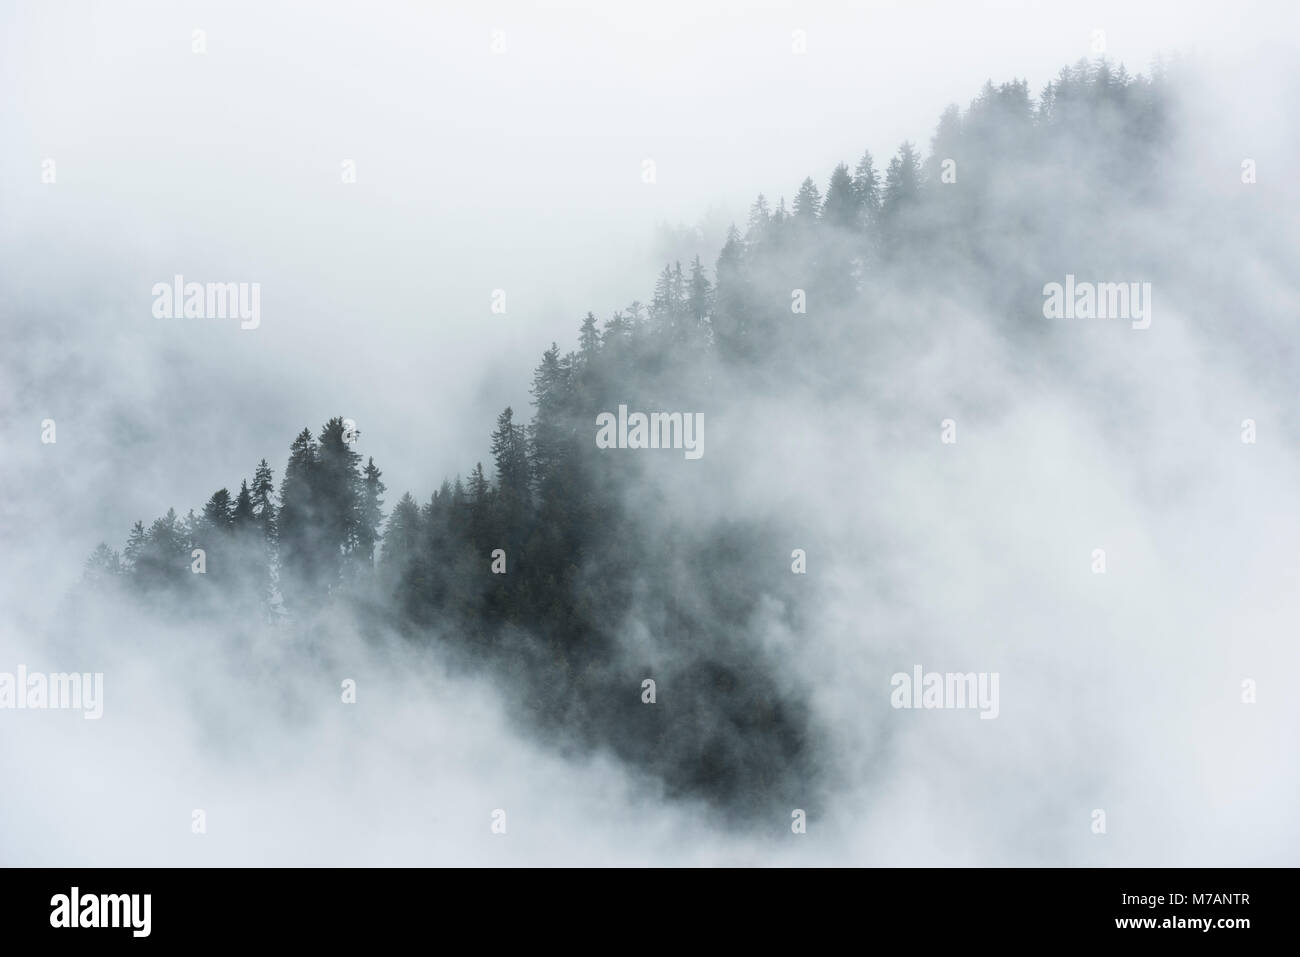 Misty mood in the Dolomite Alps with telephoto lens, Italy Stock Photo